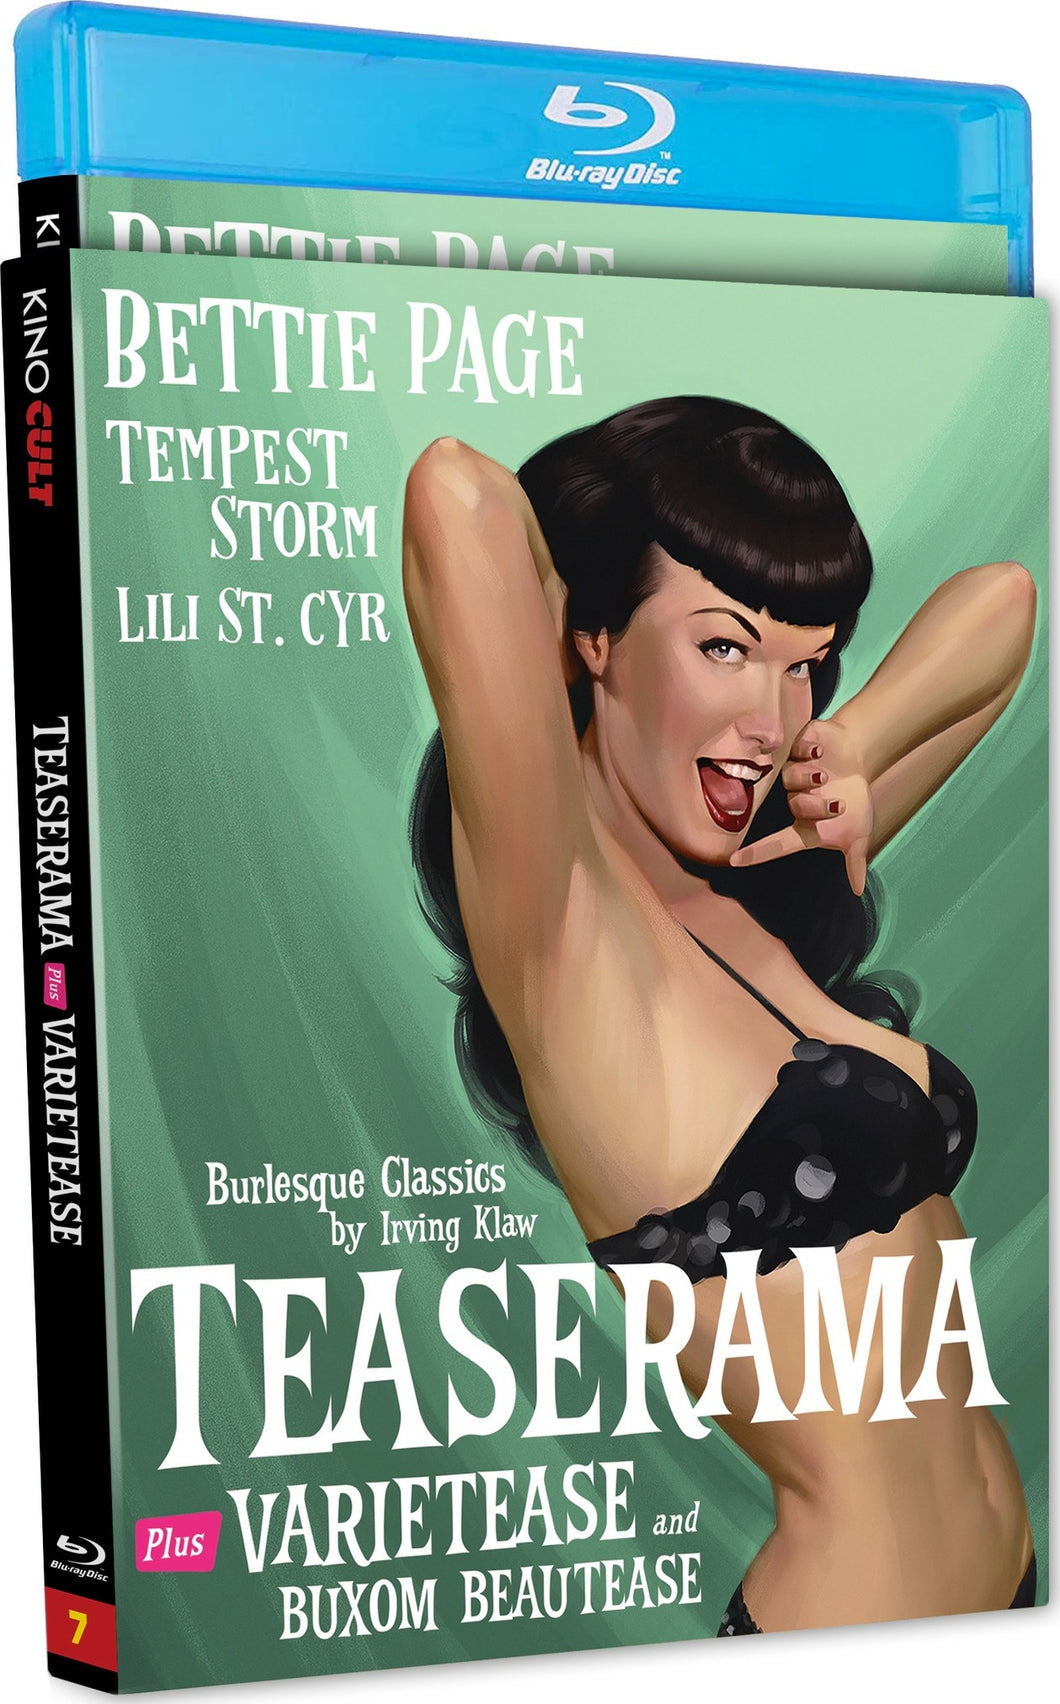 Teaserama - front cover